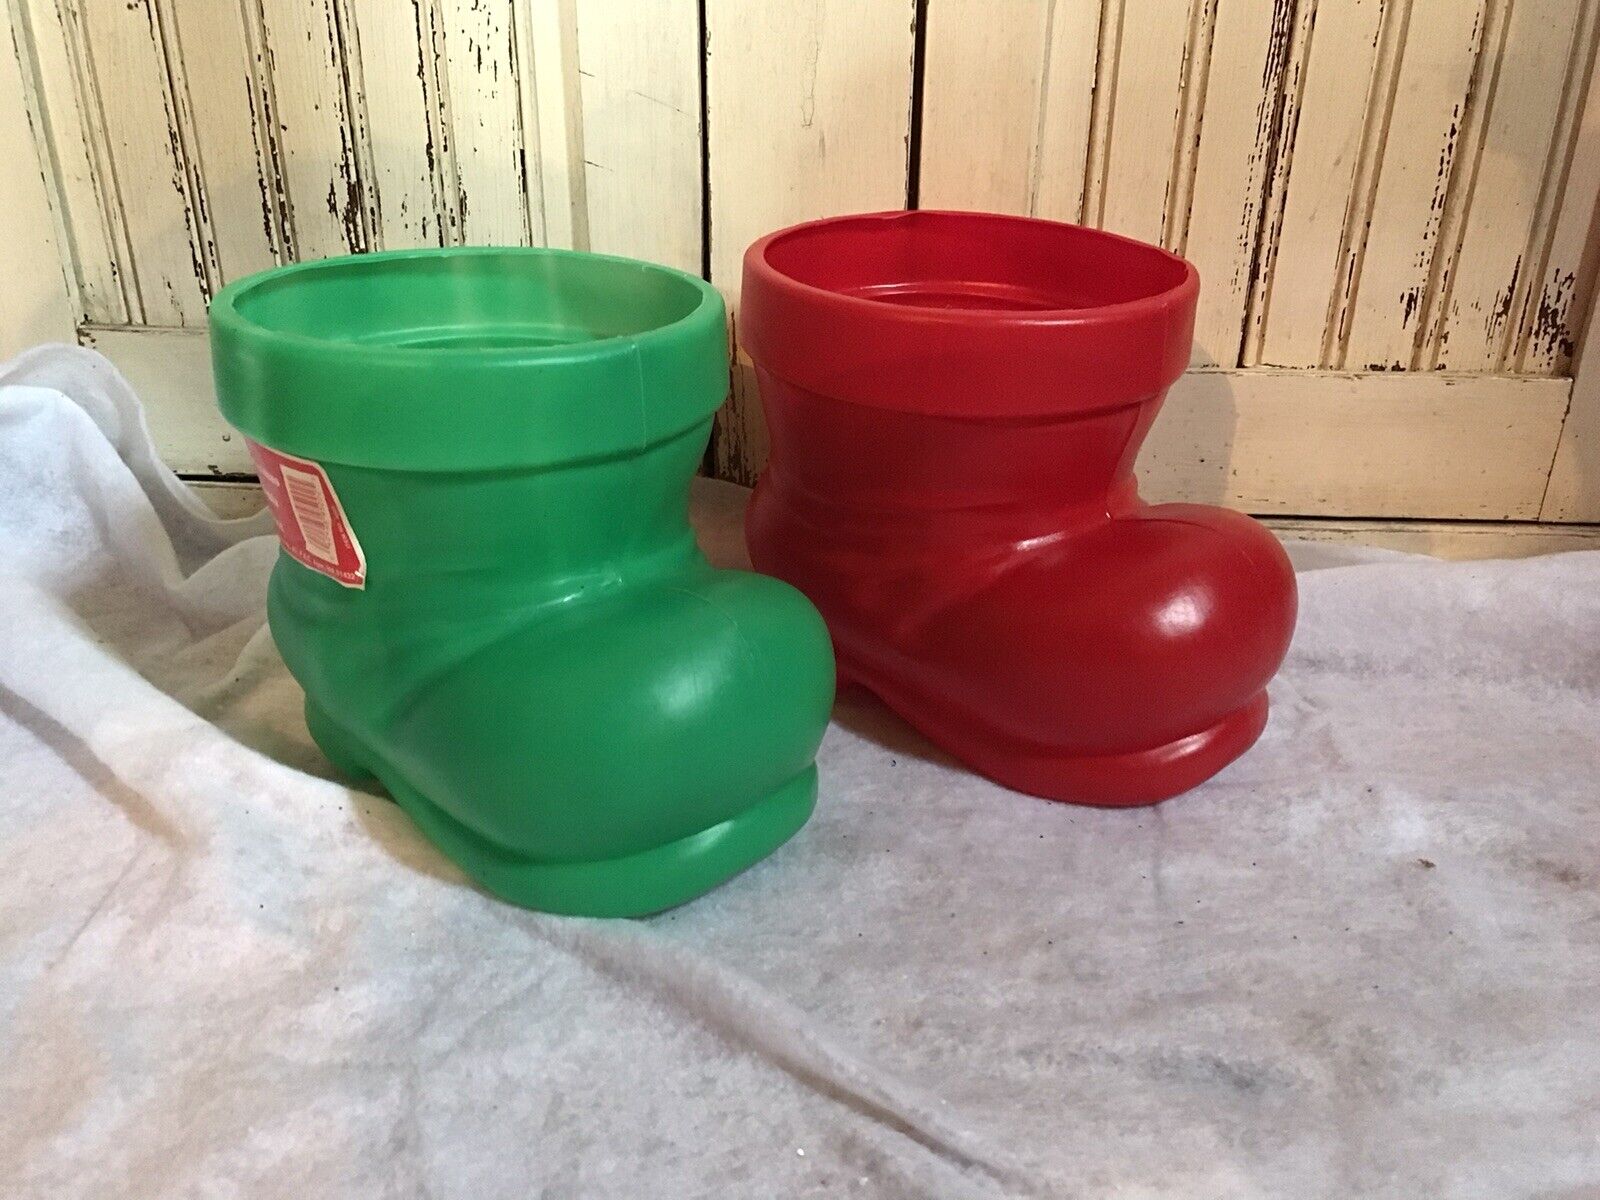 Vintage Christmas Blow Mold Santa Boots by Blinki New Old Stock Pair Green + Red